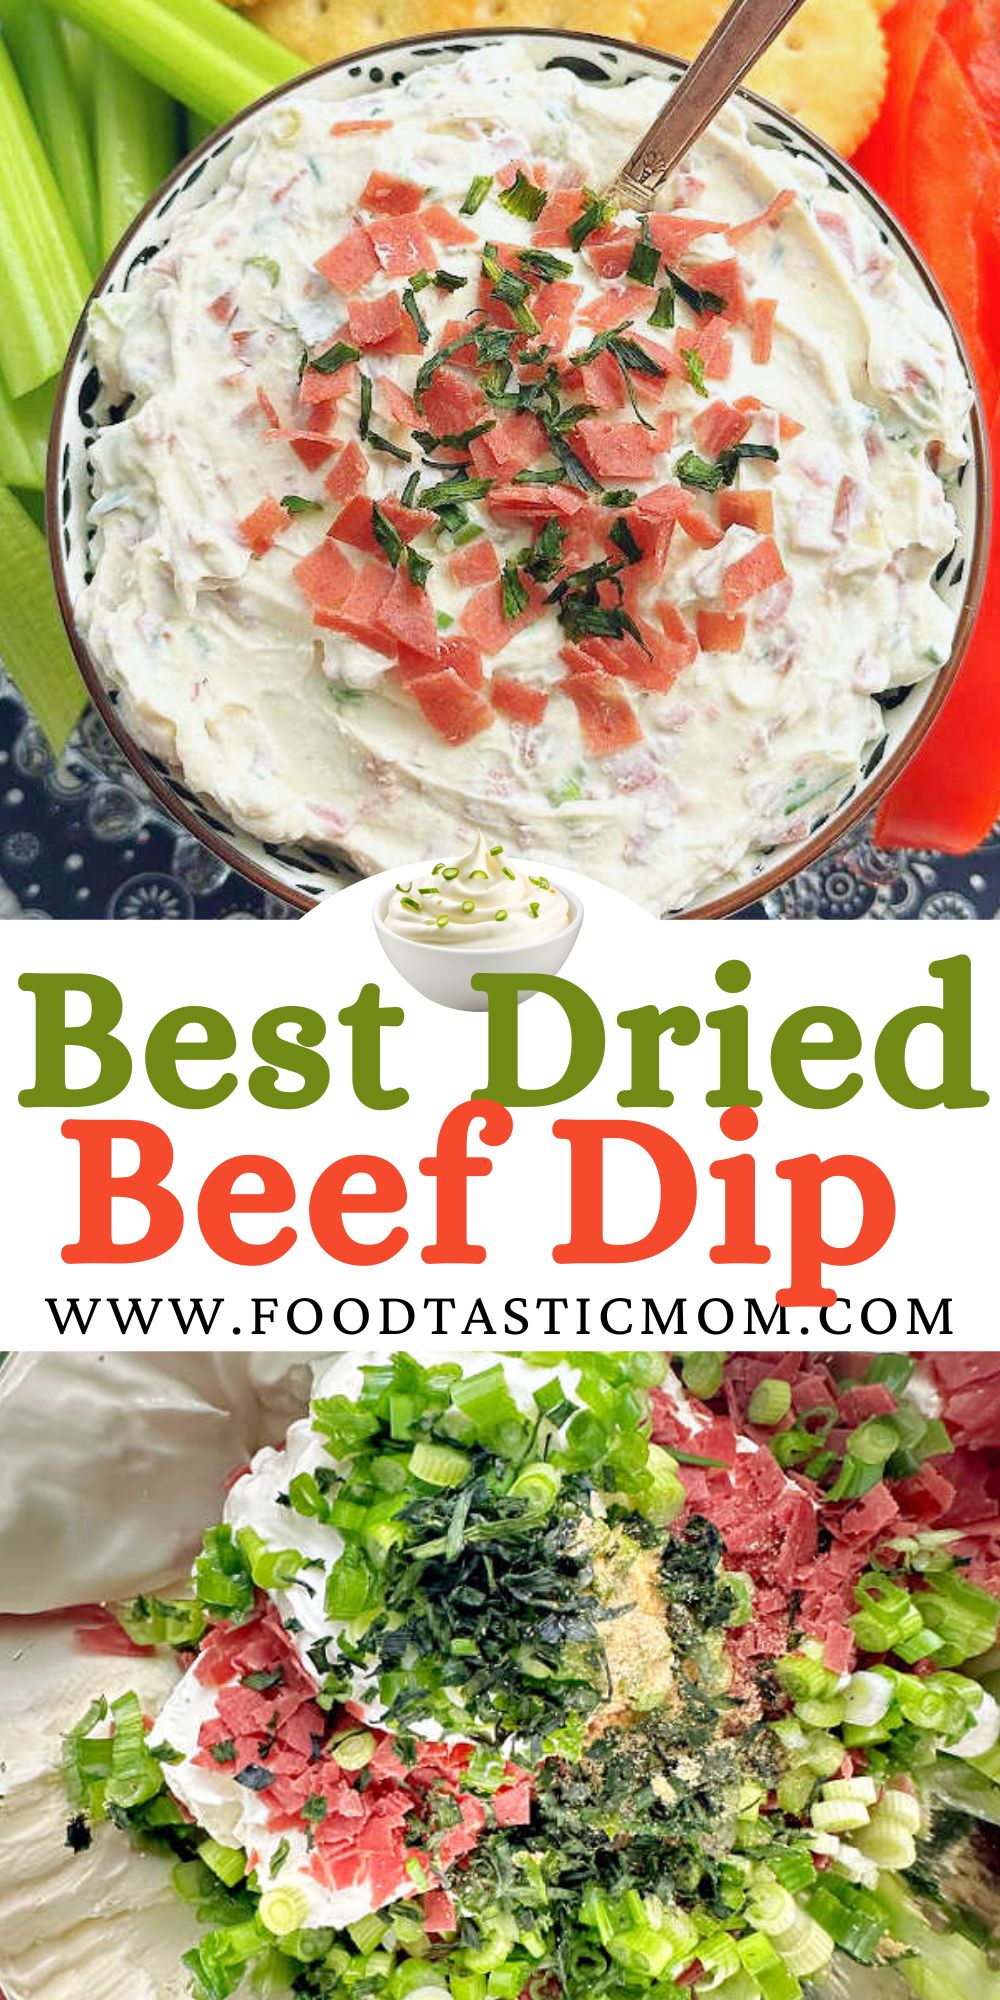 Dried Beef Dip is a classic appetizer made with simple ingredients. Serve this old-school recipe with butter cracker dippers or fresh veggies. via @foodtasticmom